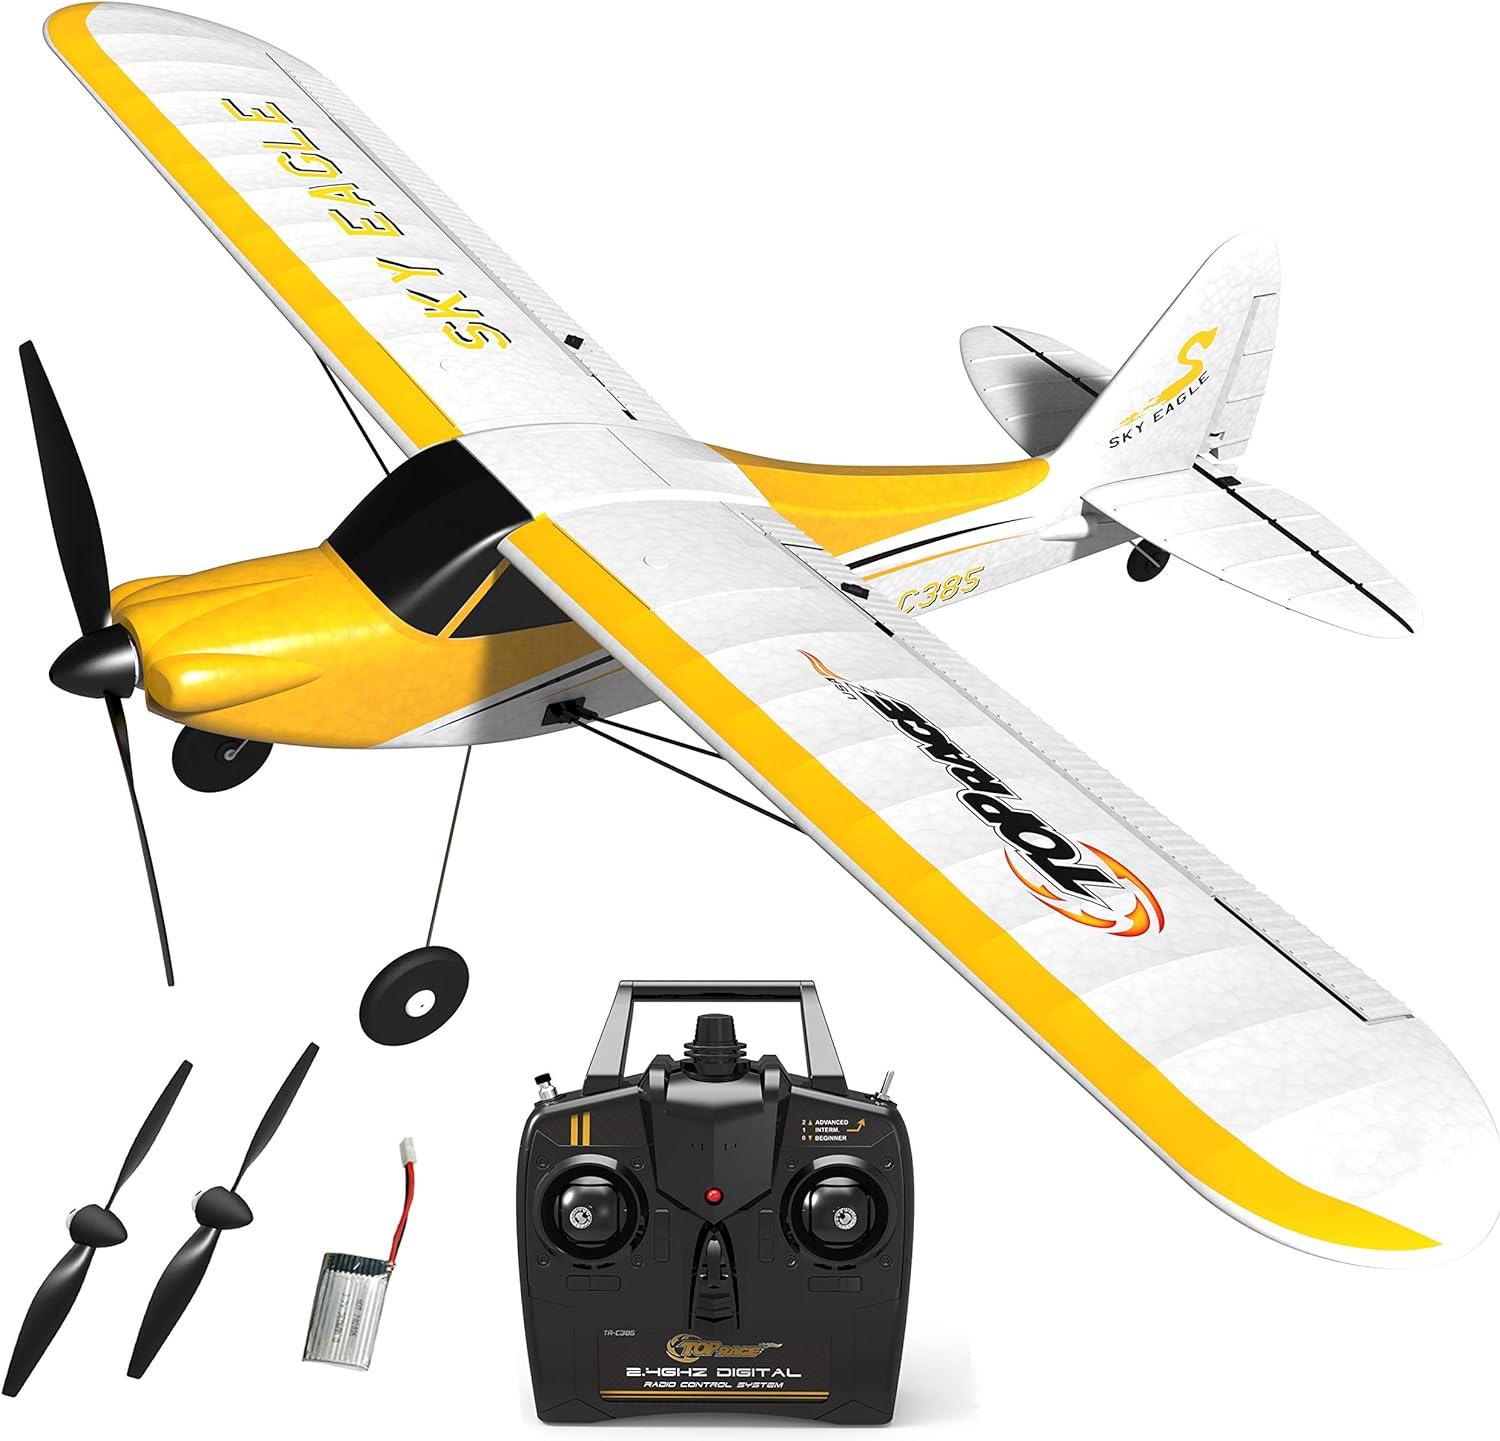 Rc Jet Plane Toy: Fly Through the Skies with RC Jet Plane Toys